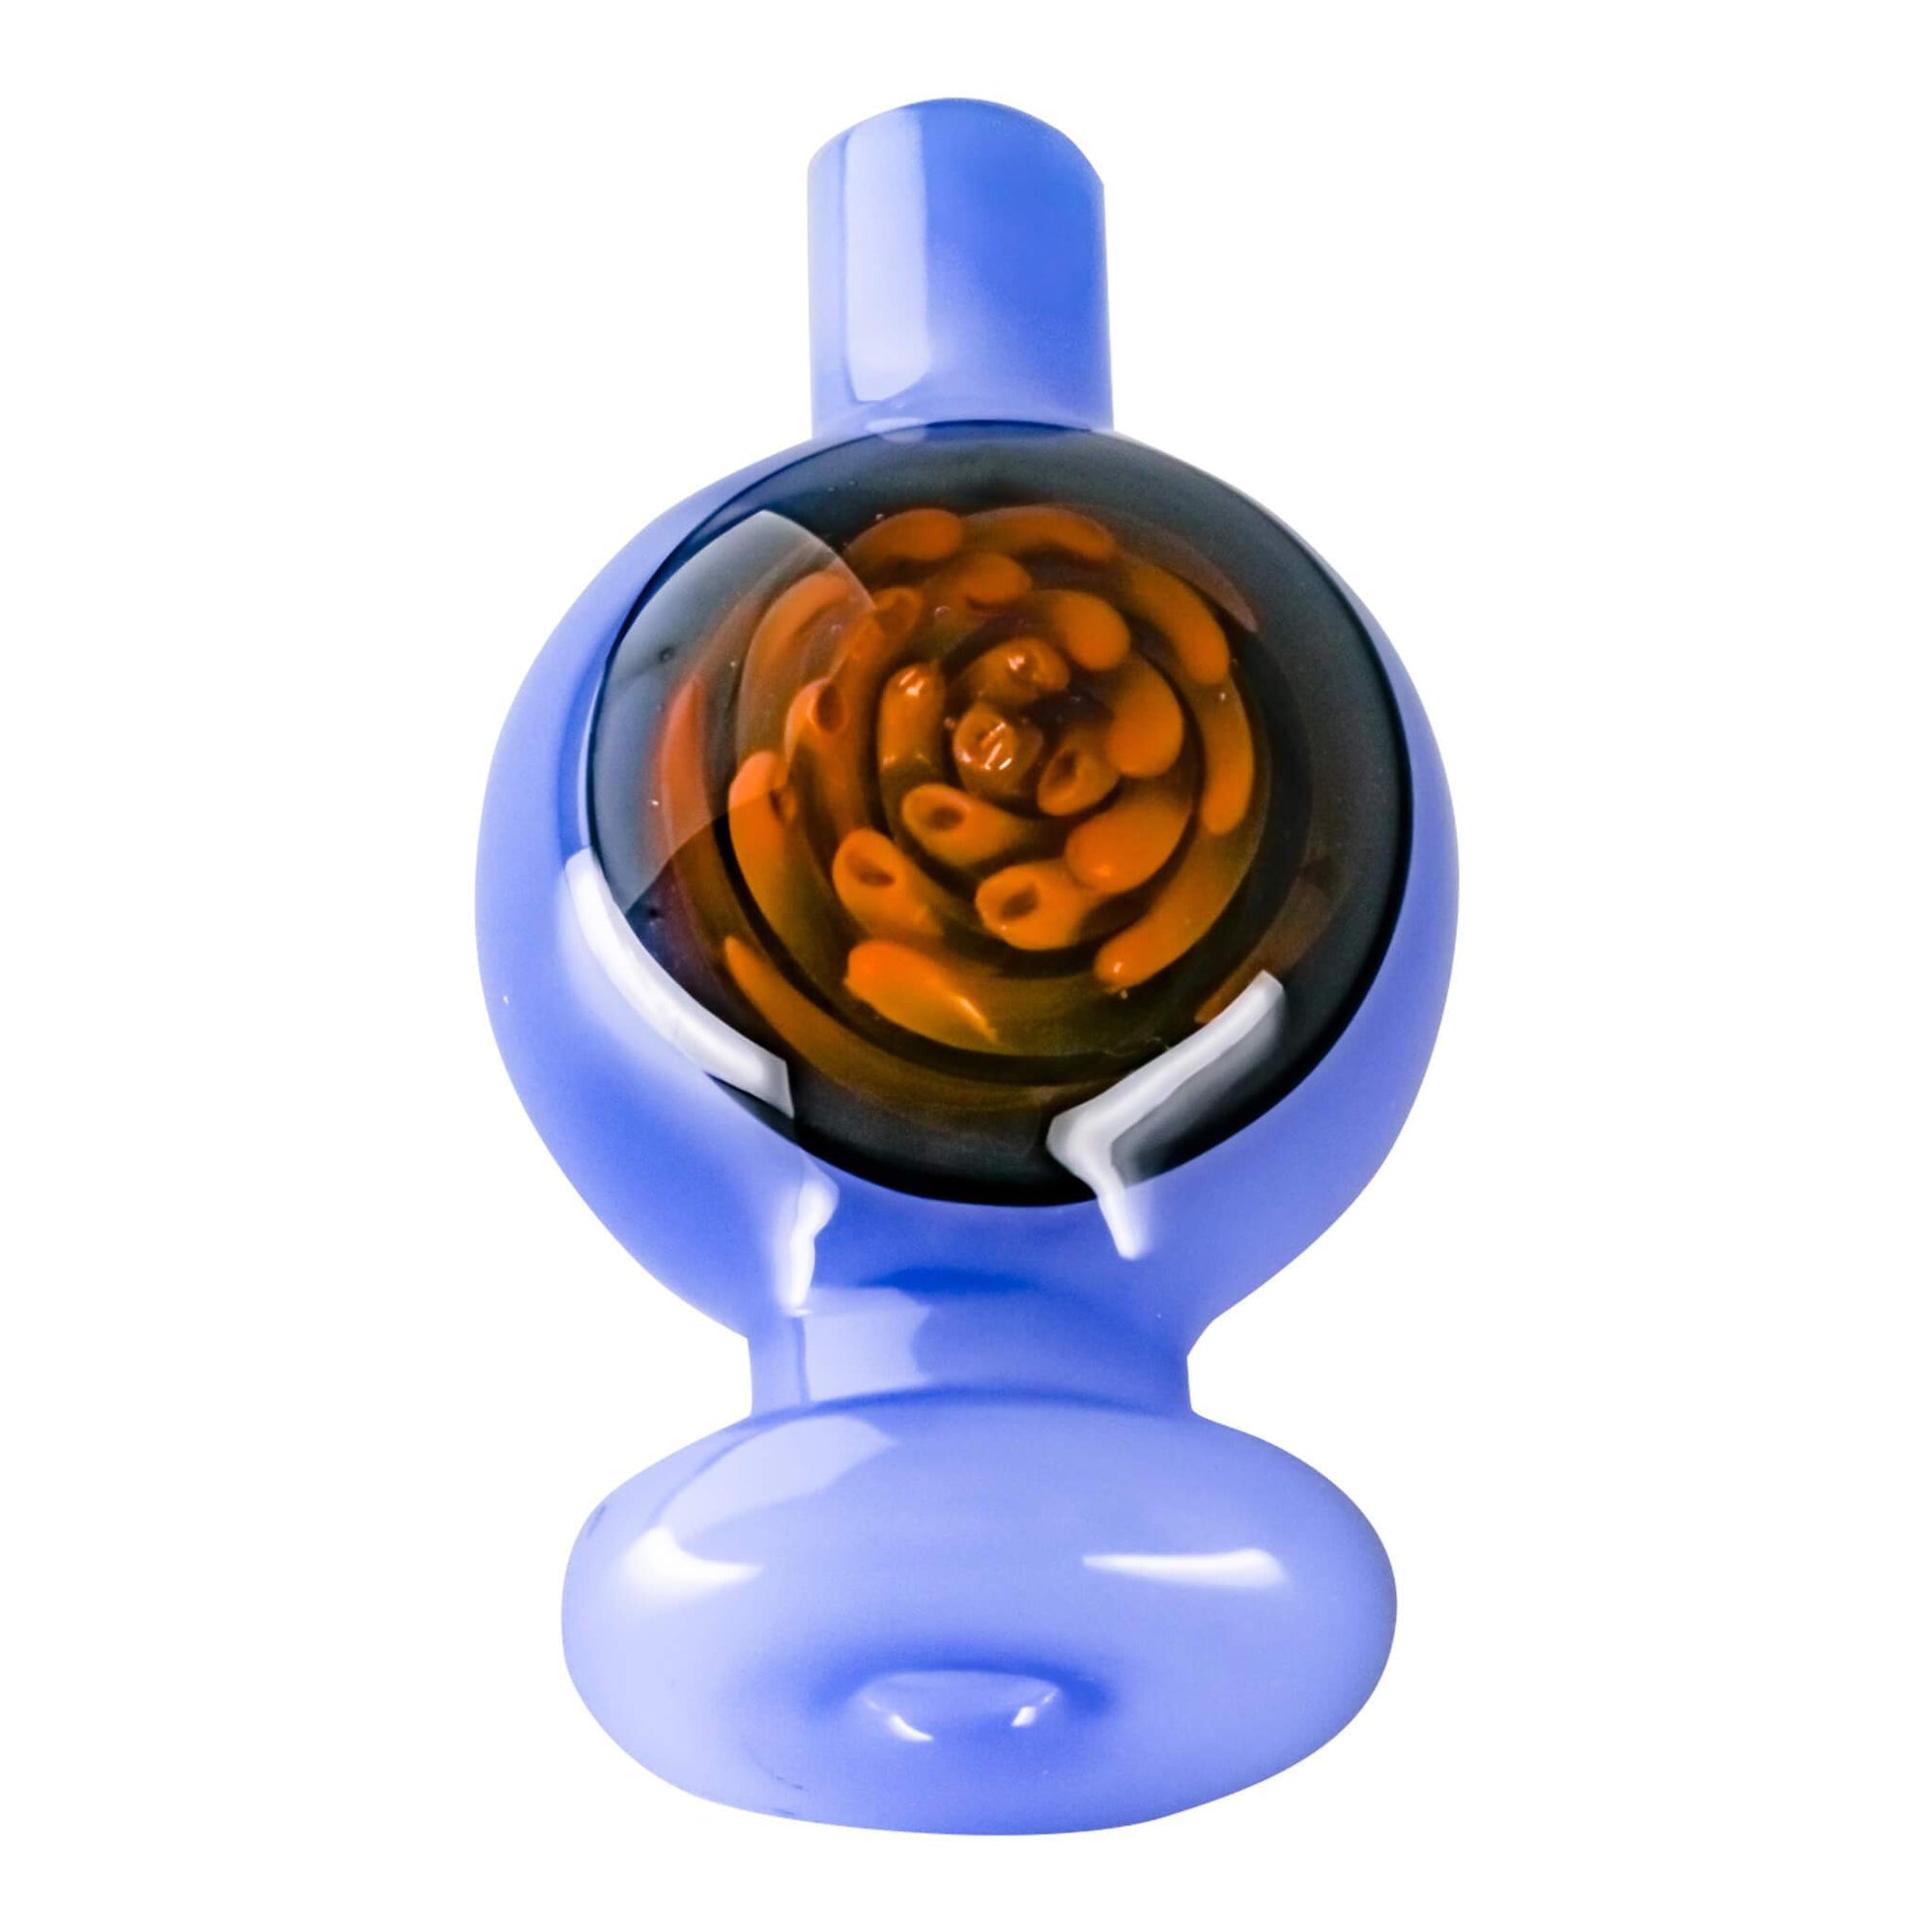 Origin Spiral Inlay Bubble Cap | Violet Prone View | the dabbing specialists